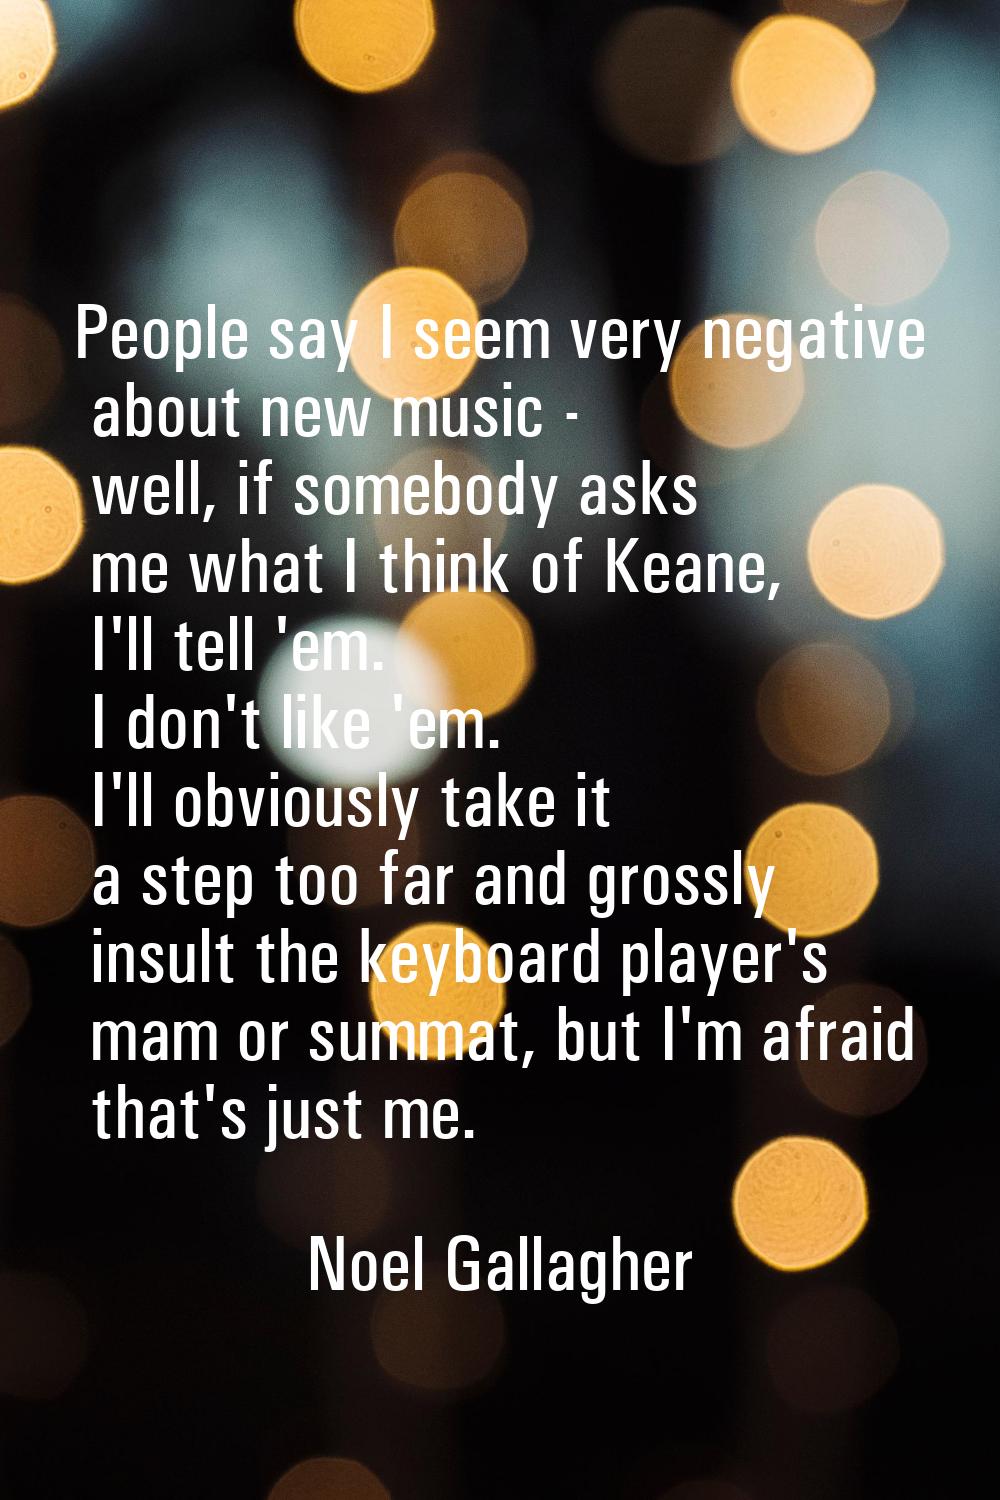 People say I seem very negative about new music - well, if somebody asks me what I think of Keane, 